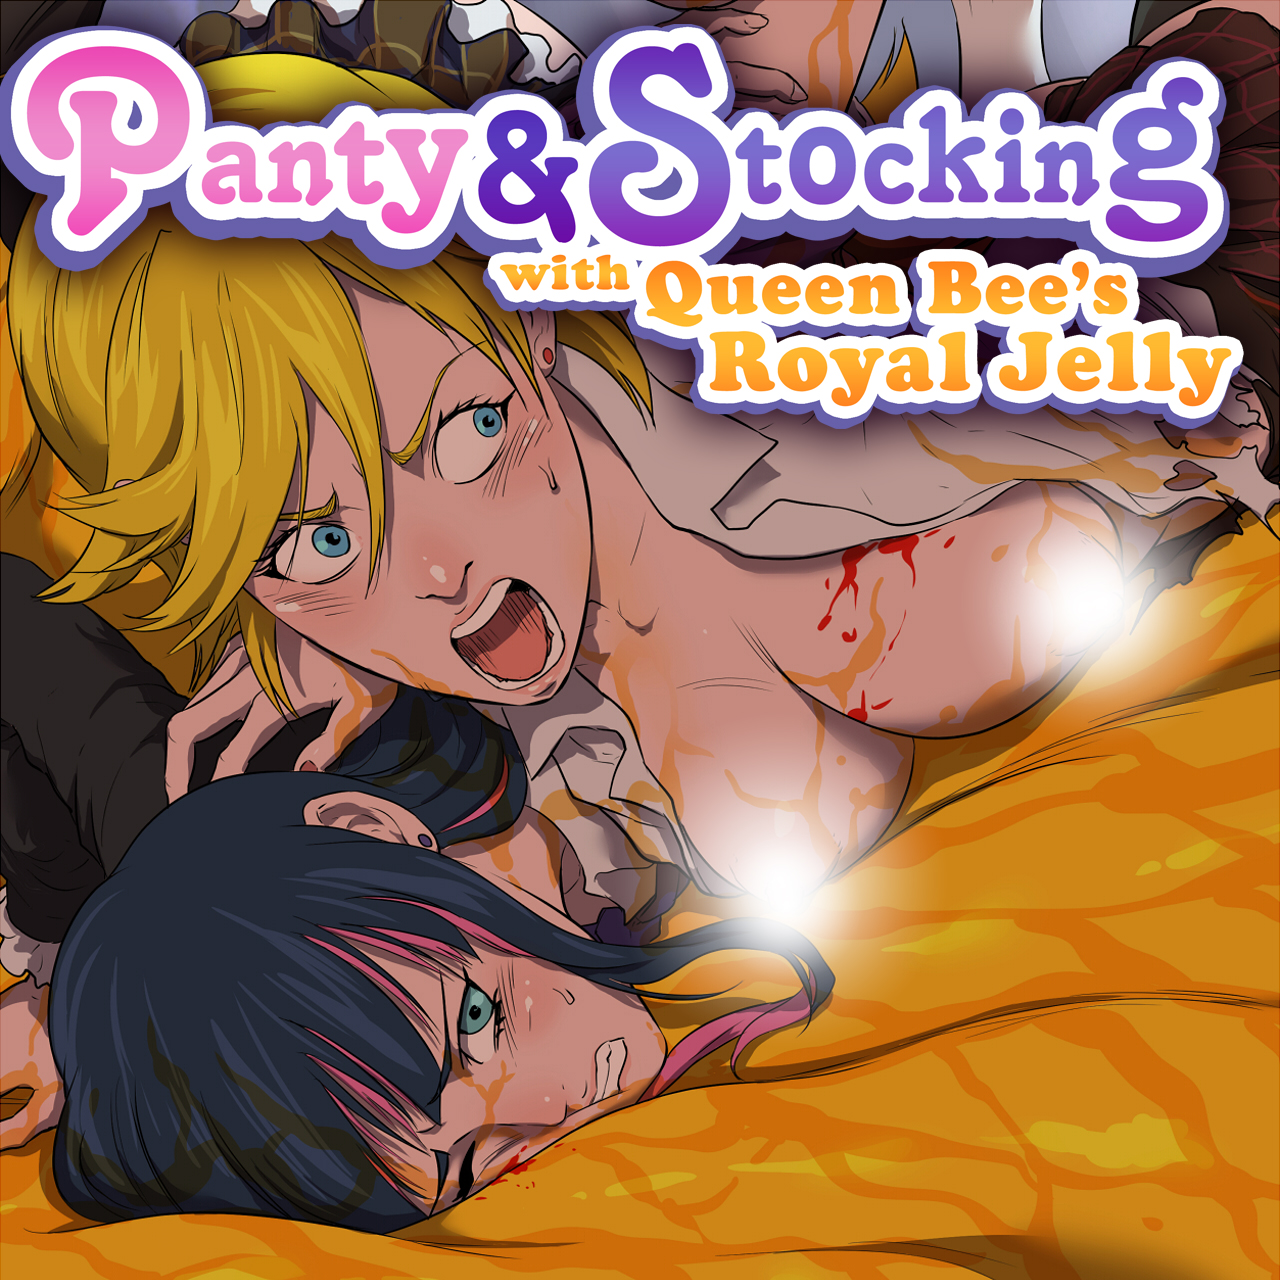 Panty & Stocking with Queen Bee's Royal Jelly